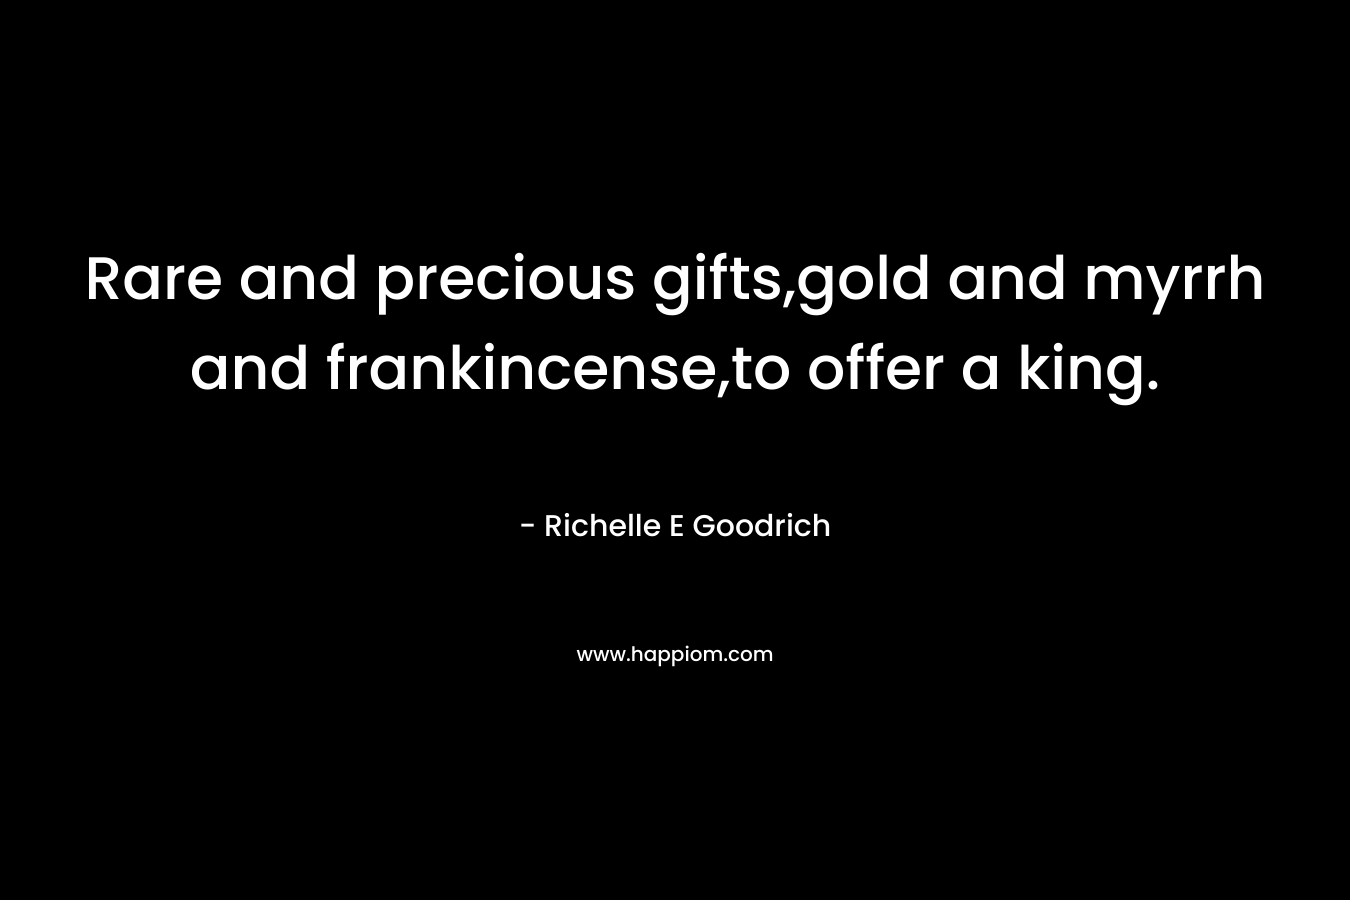 Rare and precious gifts,gold and myrrh and frankincense,to offer a king.